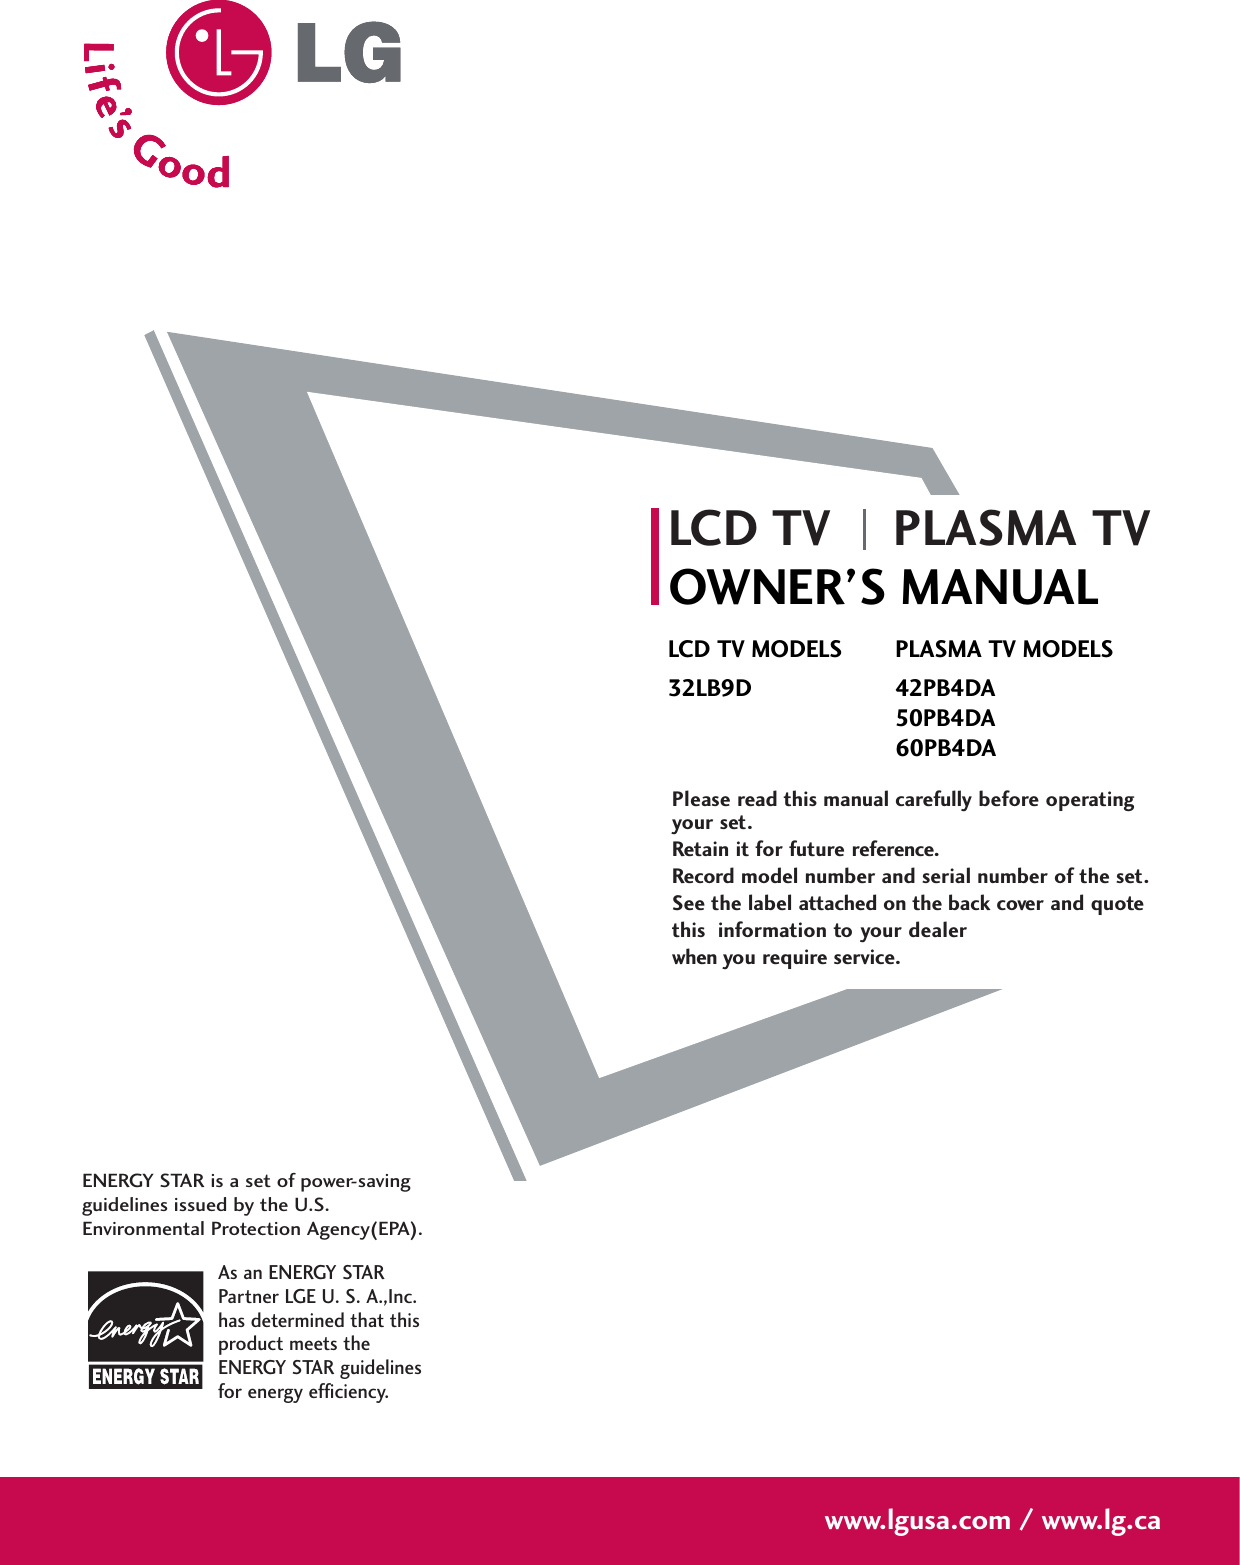 Please read this manual carefully before operatingyour set. Retain it for future reference.Record model number and serial number of the set. See the label attached on the back cover and quote this  information to your dealer when you require service.LCD TV PLASMA TVOWNER’S MANUALLCD TV MODELS32LB9DPLASMA TV MODELS42PB4DA50PB4DA60PB4DAwww.lgusa.com / www.lg.caAs an ENERGY STARPartner LGE U. S. A.,Inc.has determined that thisproduct meets theENERGY STAR guidelinesfor energy efficiency.ENERGY STAR is a set of power-savingguidelines issued by the U.S.Environmental Protection Agency(EPA).